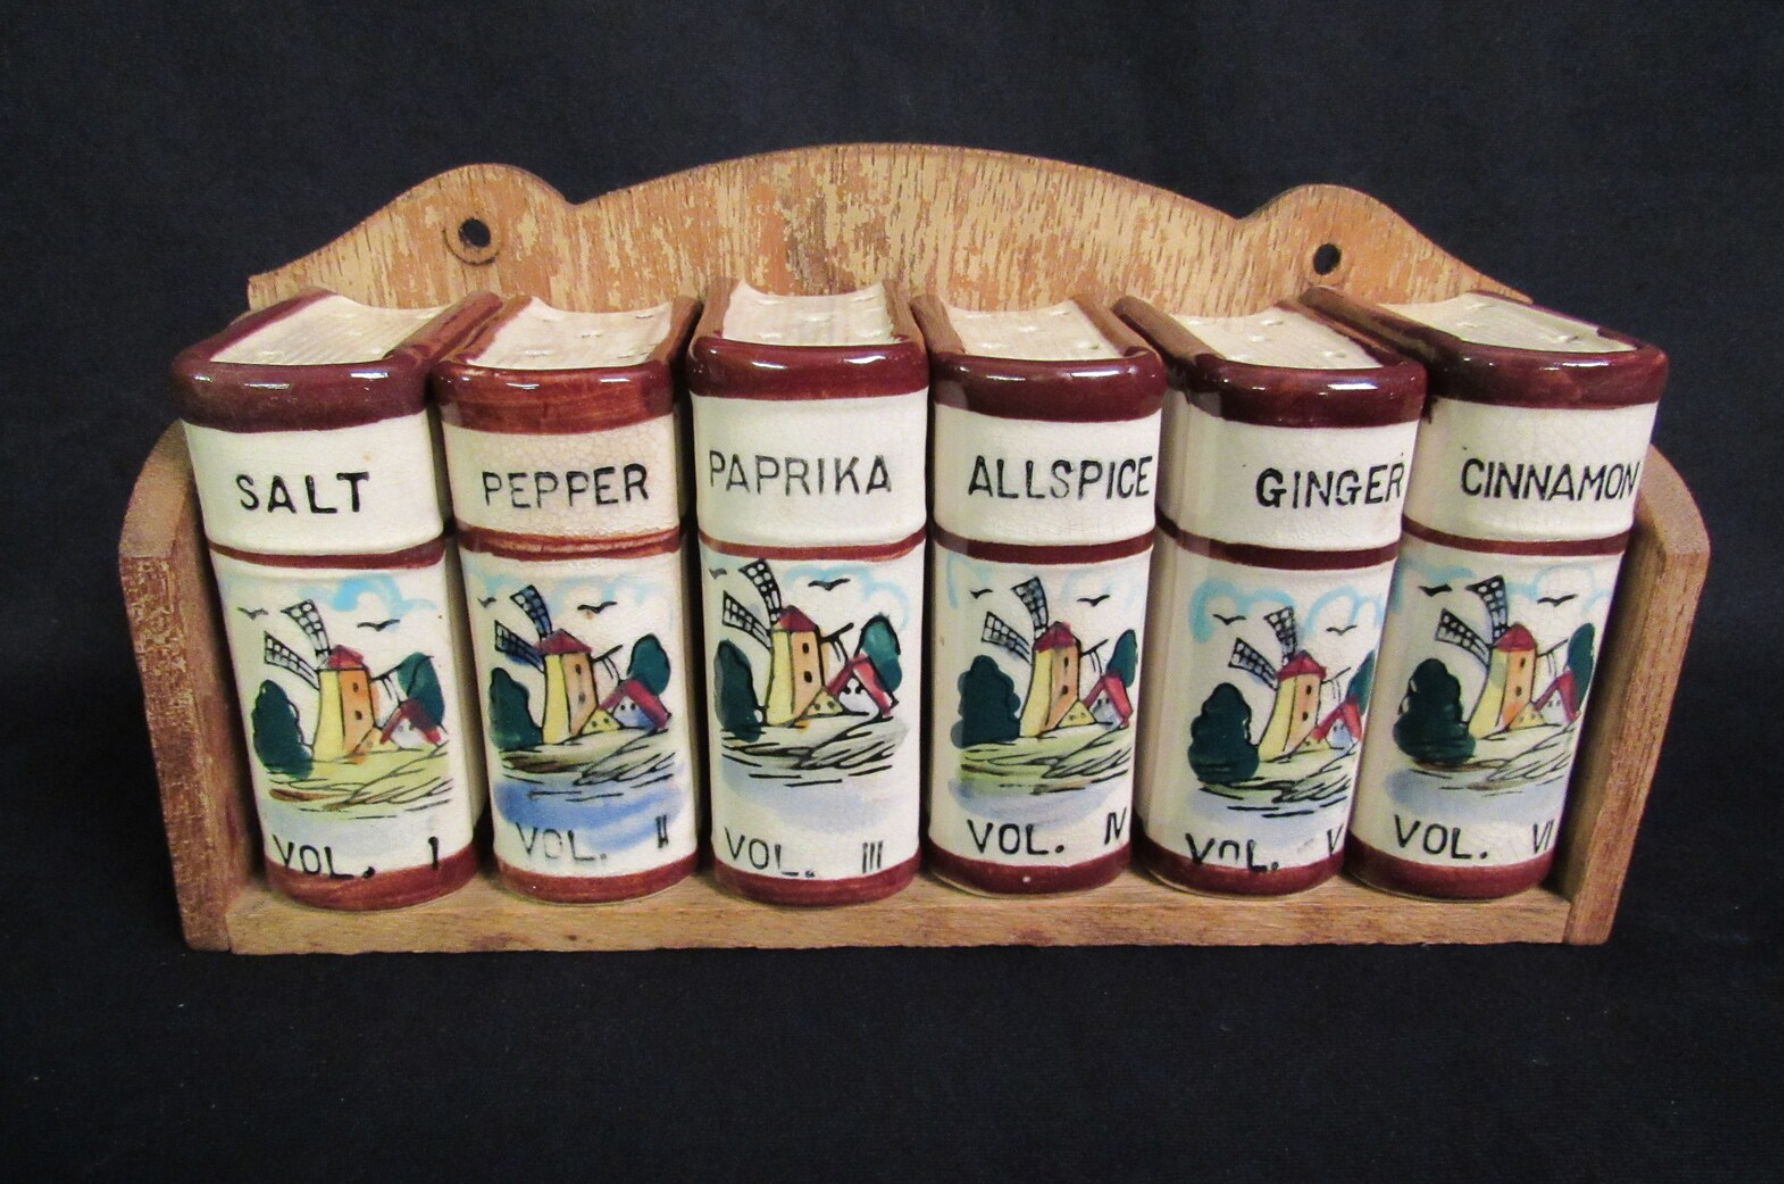 A vintage spice rack holding six ceramic spice jars shaped like books, labeled with the names of spices and 'Vol I, Vol II, Vol III' etc.